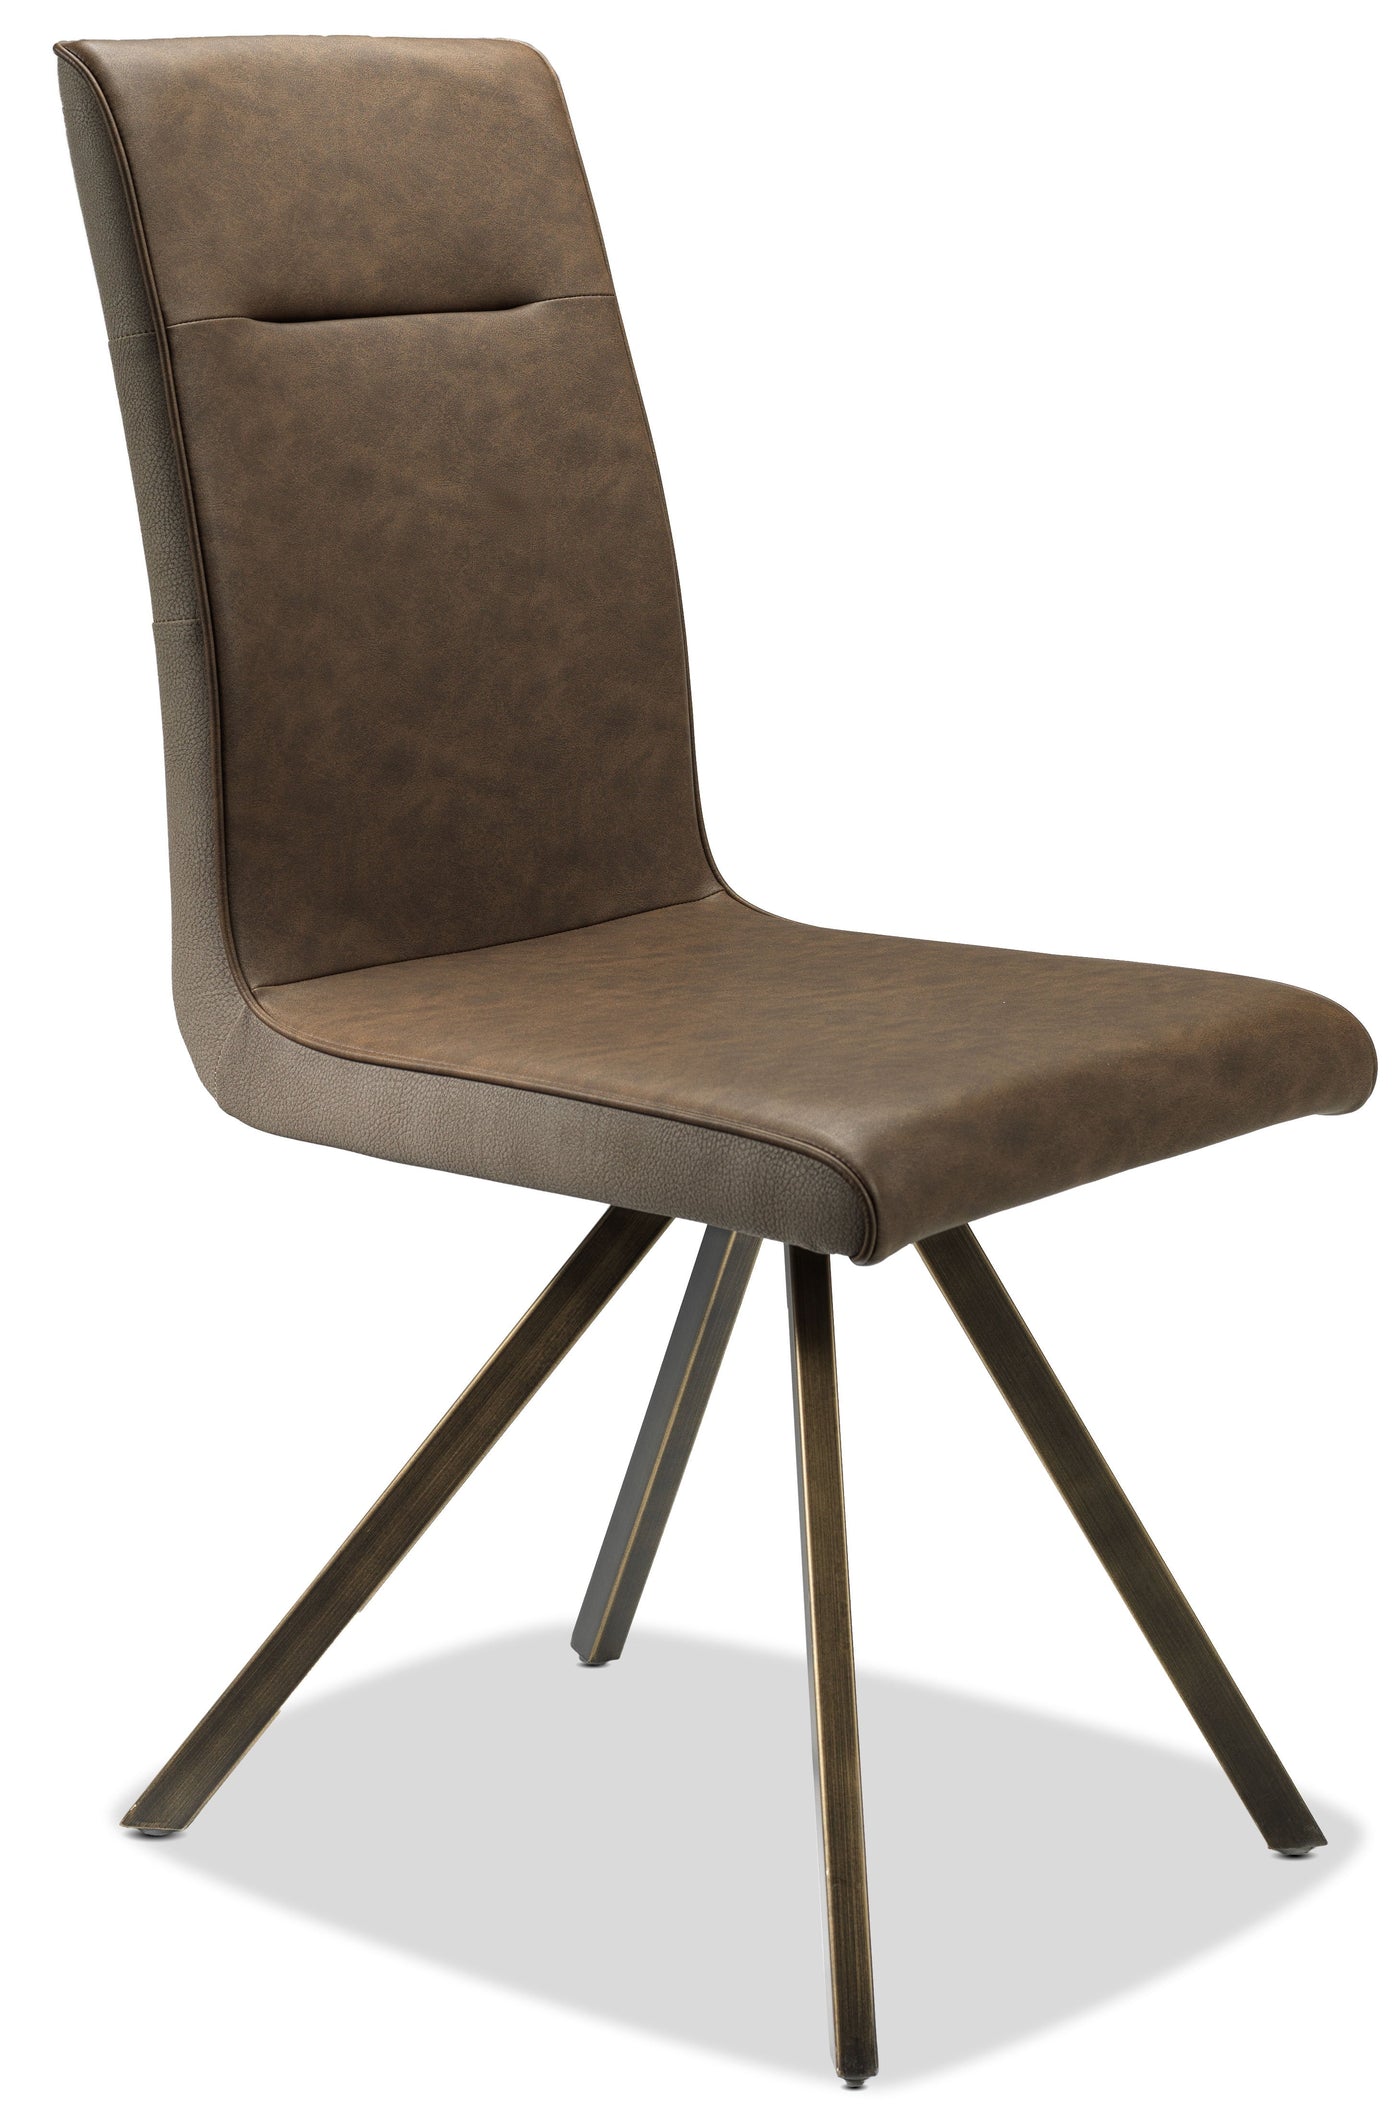 Bandit Side Chair - Muted Gold